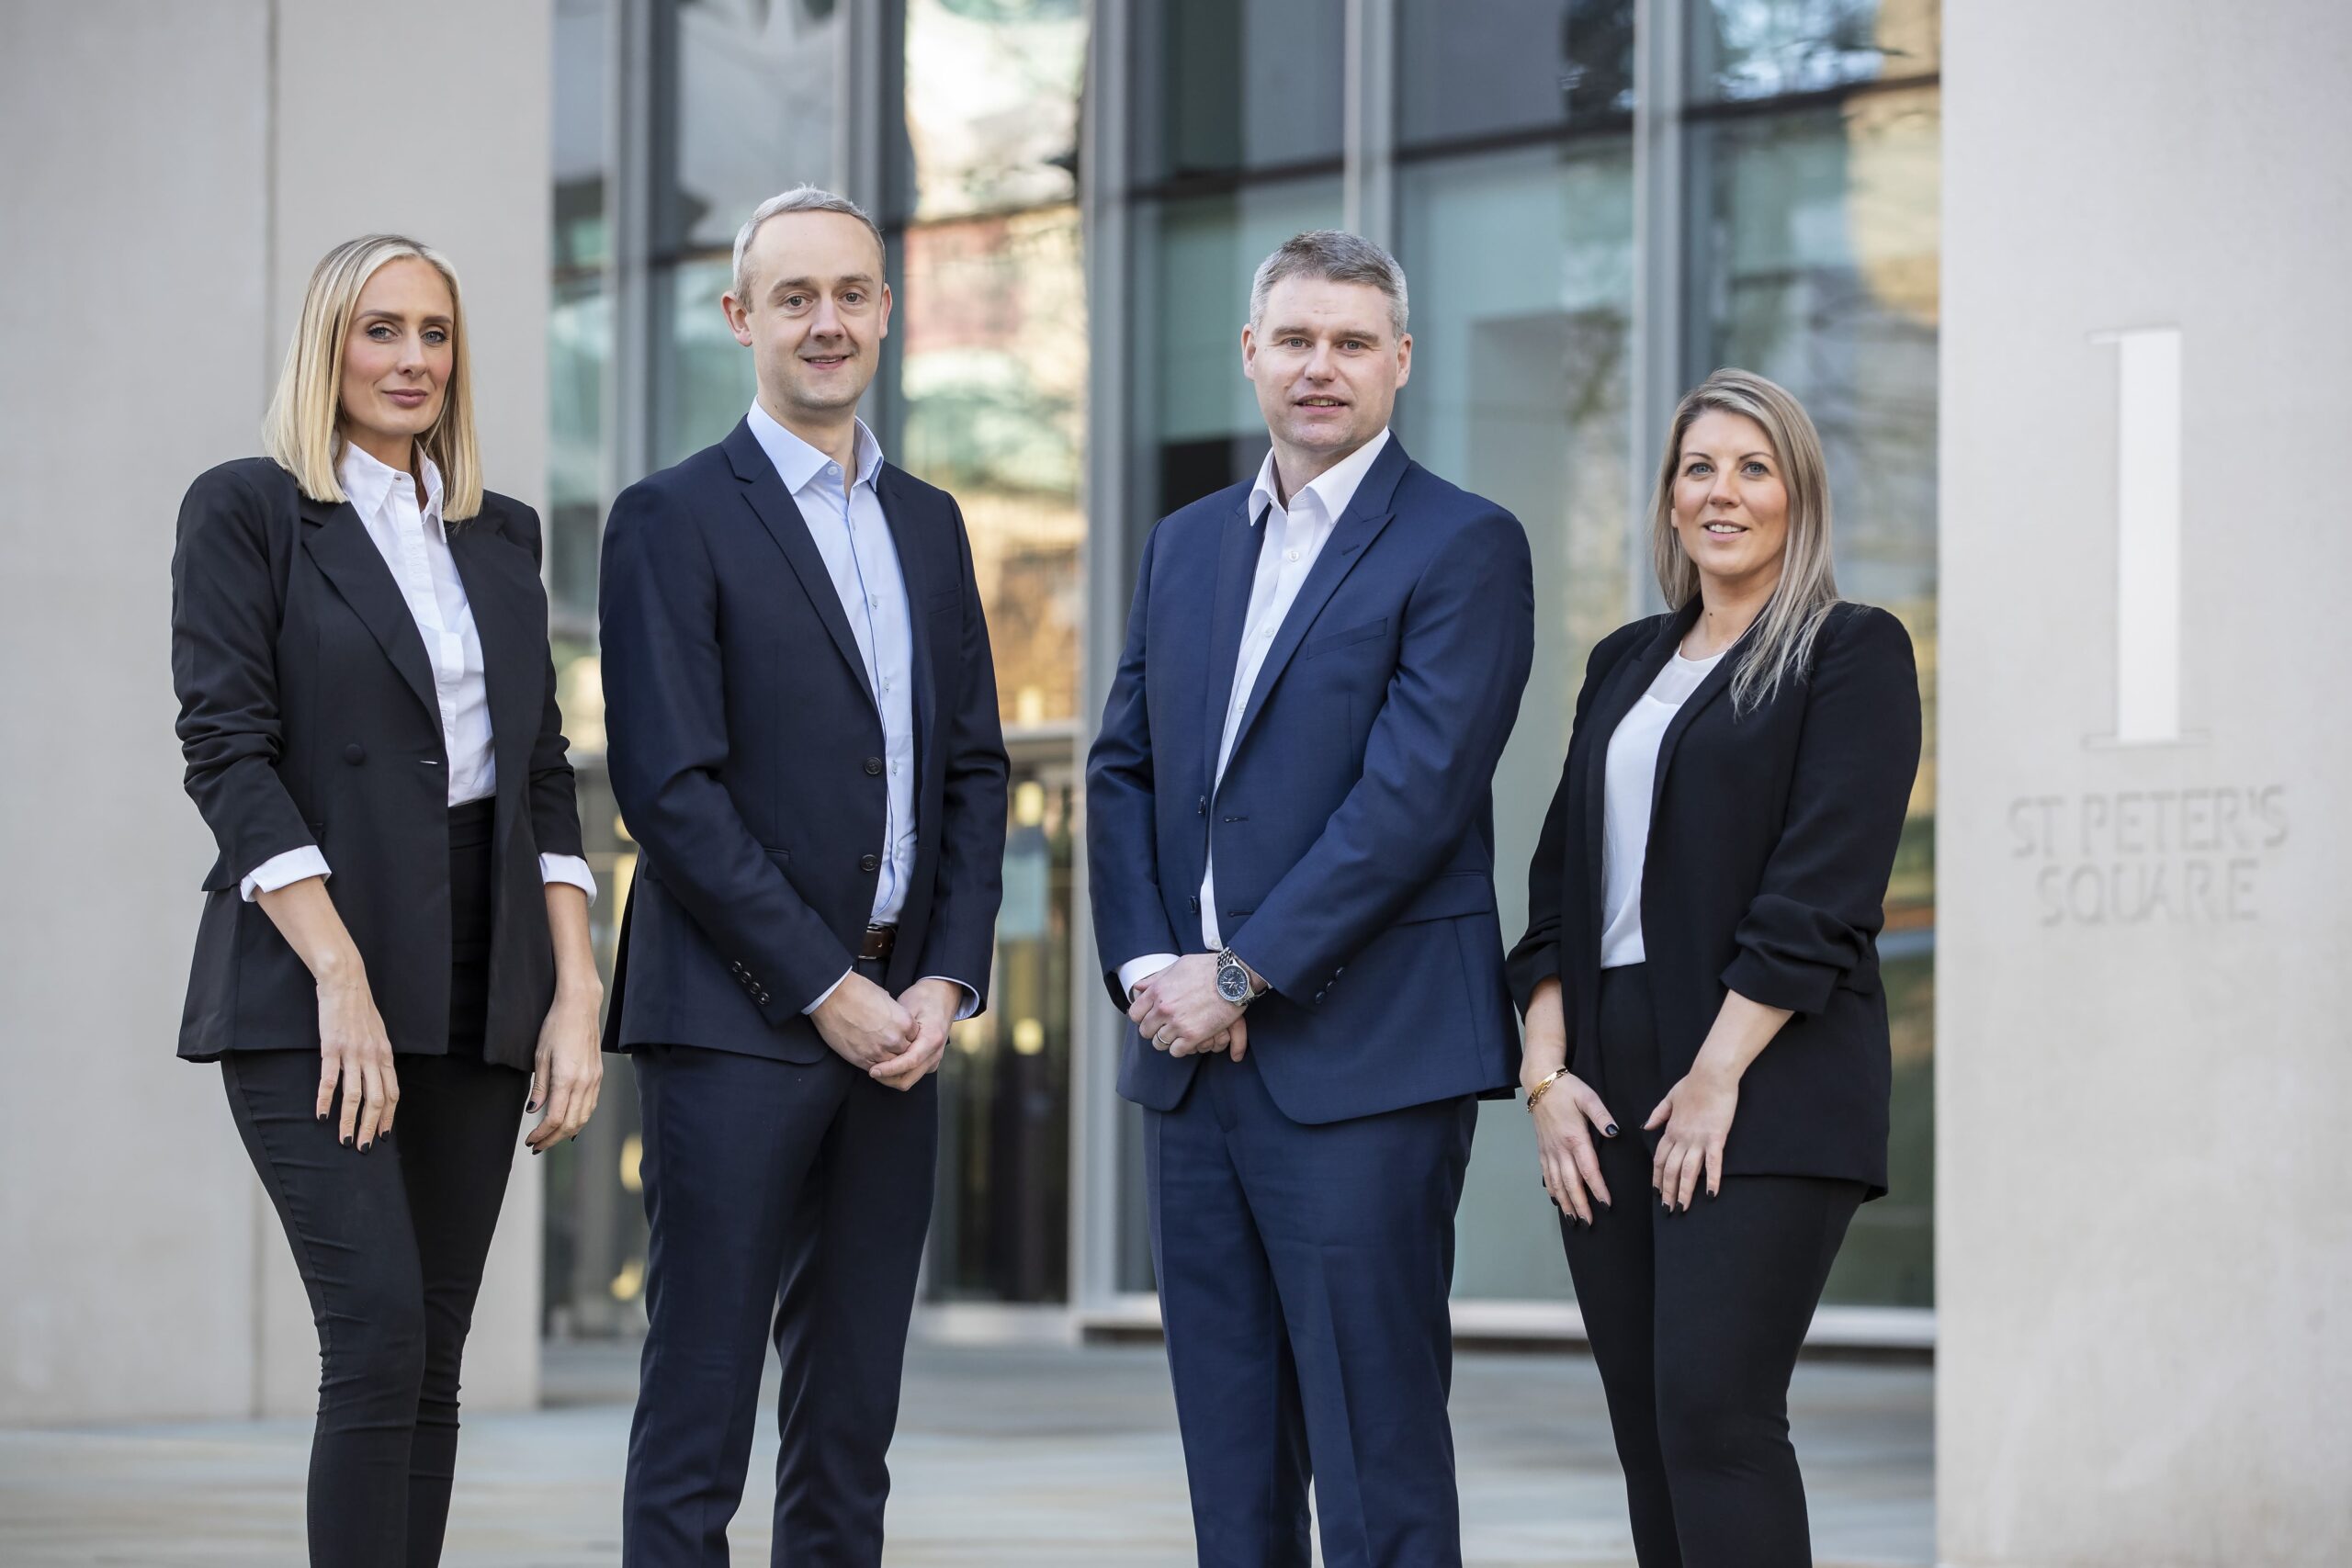 Manchester-based project, cost and programme management company, Hive Projects, hits two-year milestone following rapid expansion and new appointments